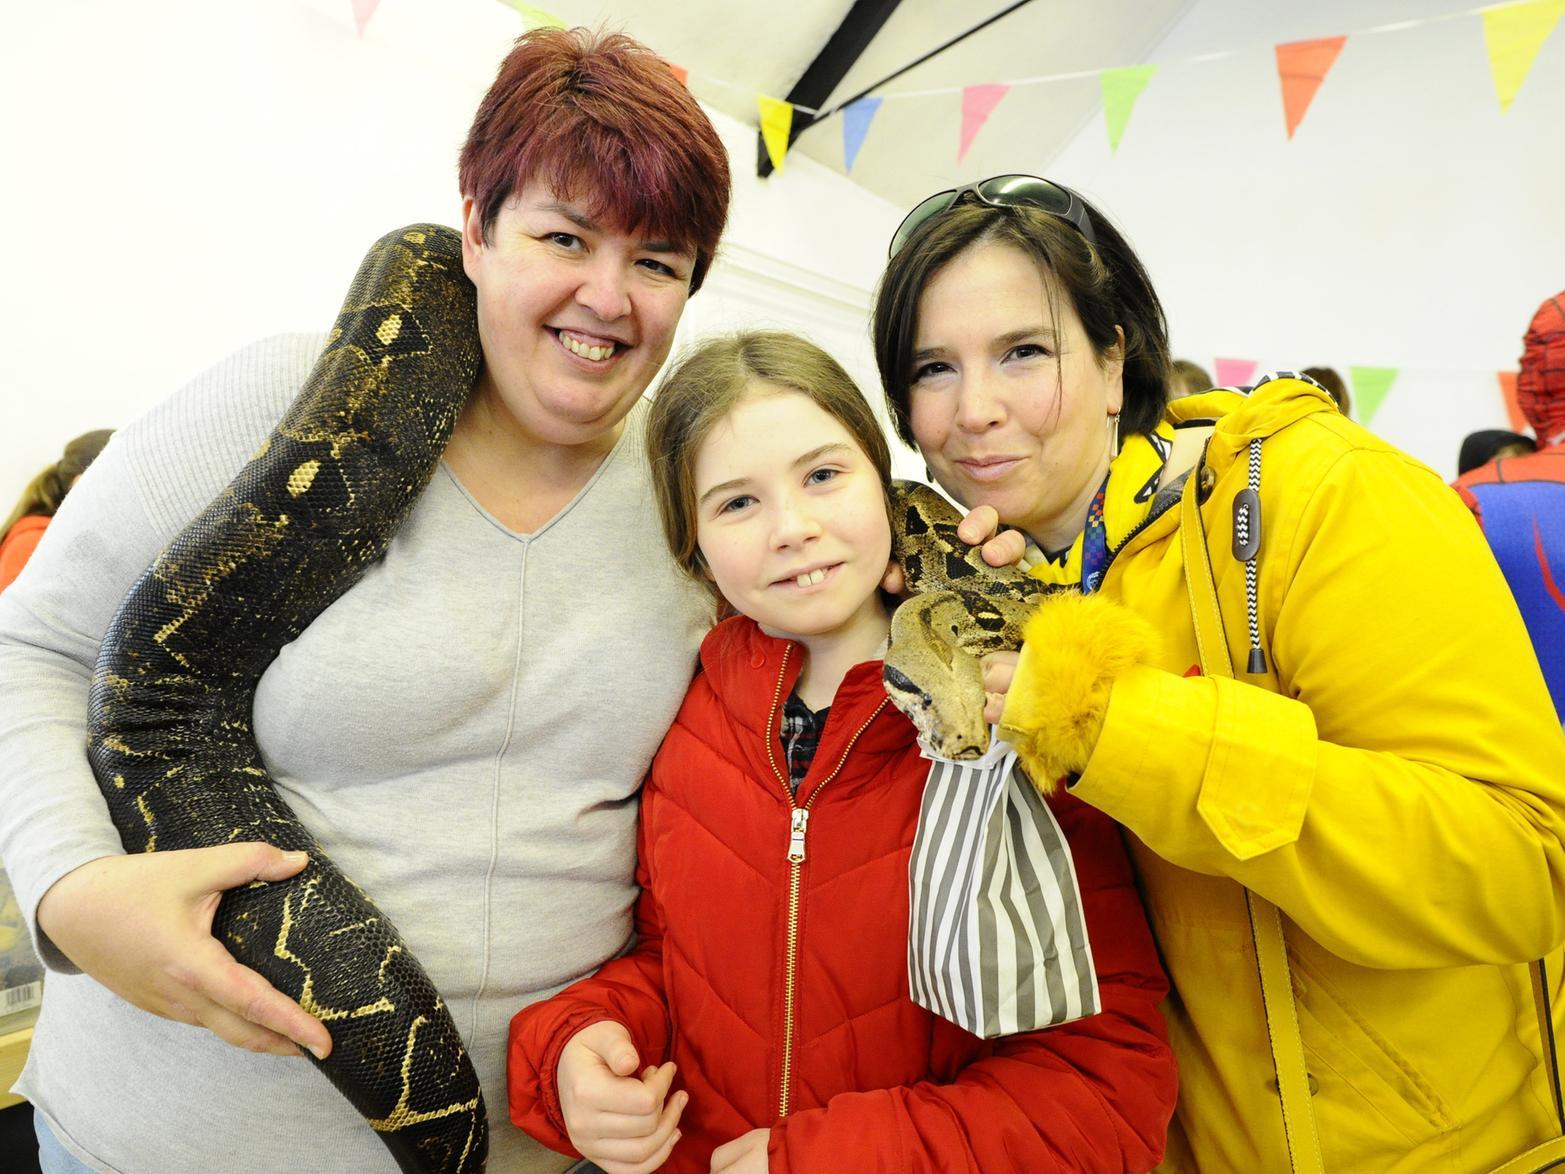 Bothkennar Activity Centre - Jacquie Miller, Erin Purdon (10) and Cllr Laura Murtagh, with Hissy.